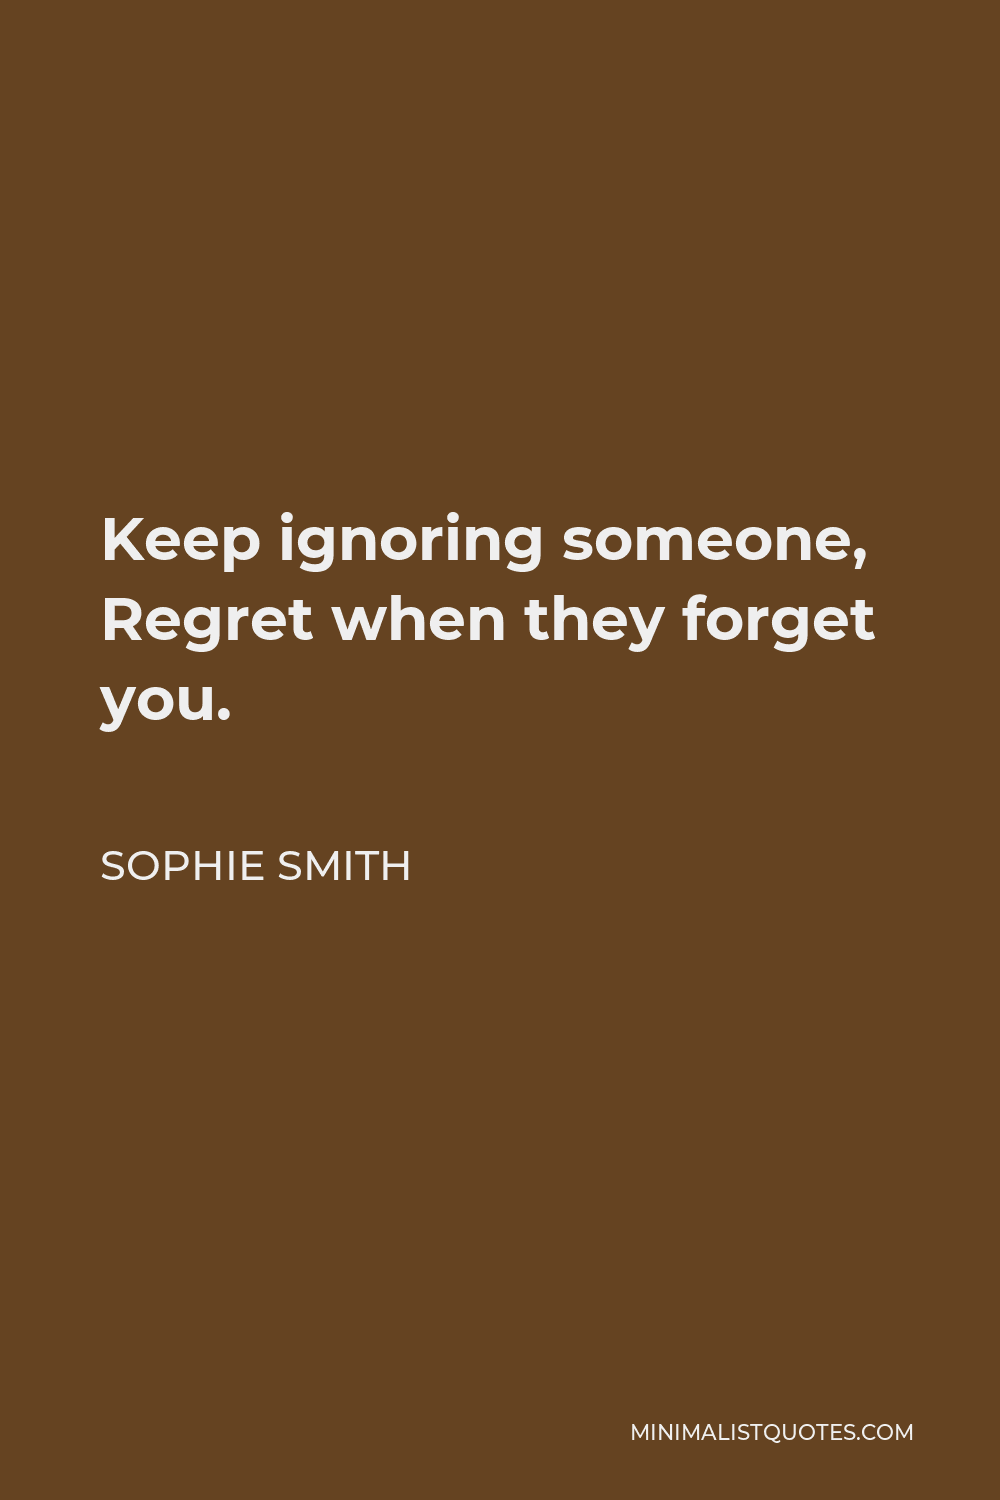 Sophie Smith Quote: Keep Ignoring Someone, Regret When They Forget You.